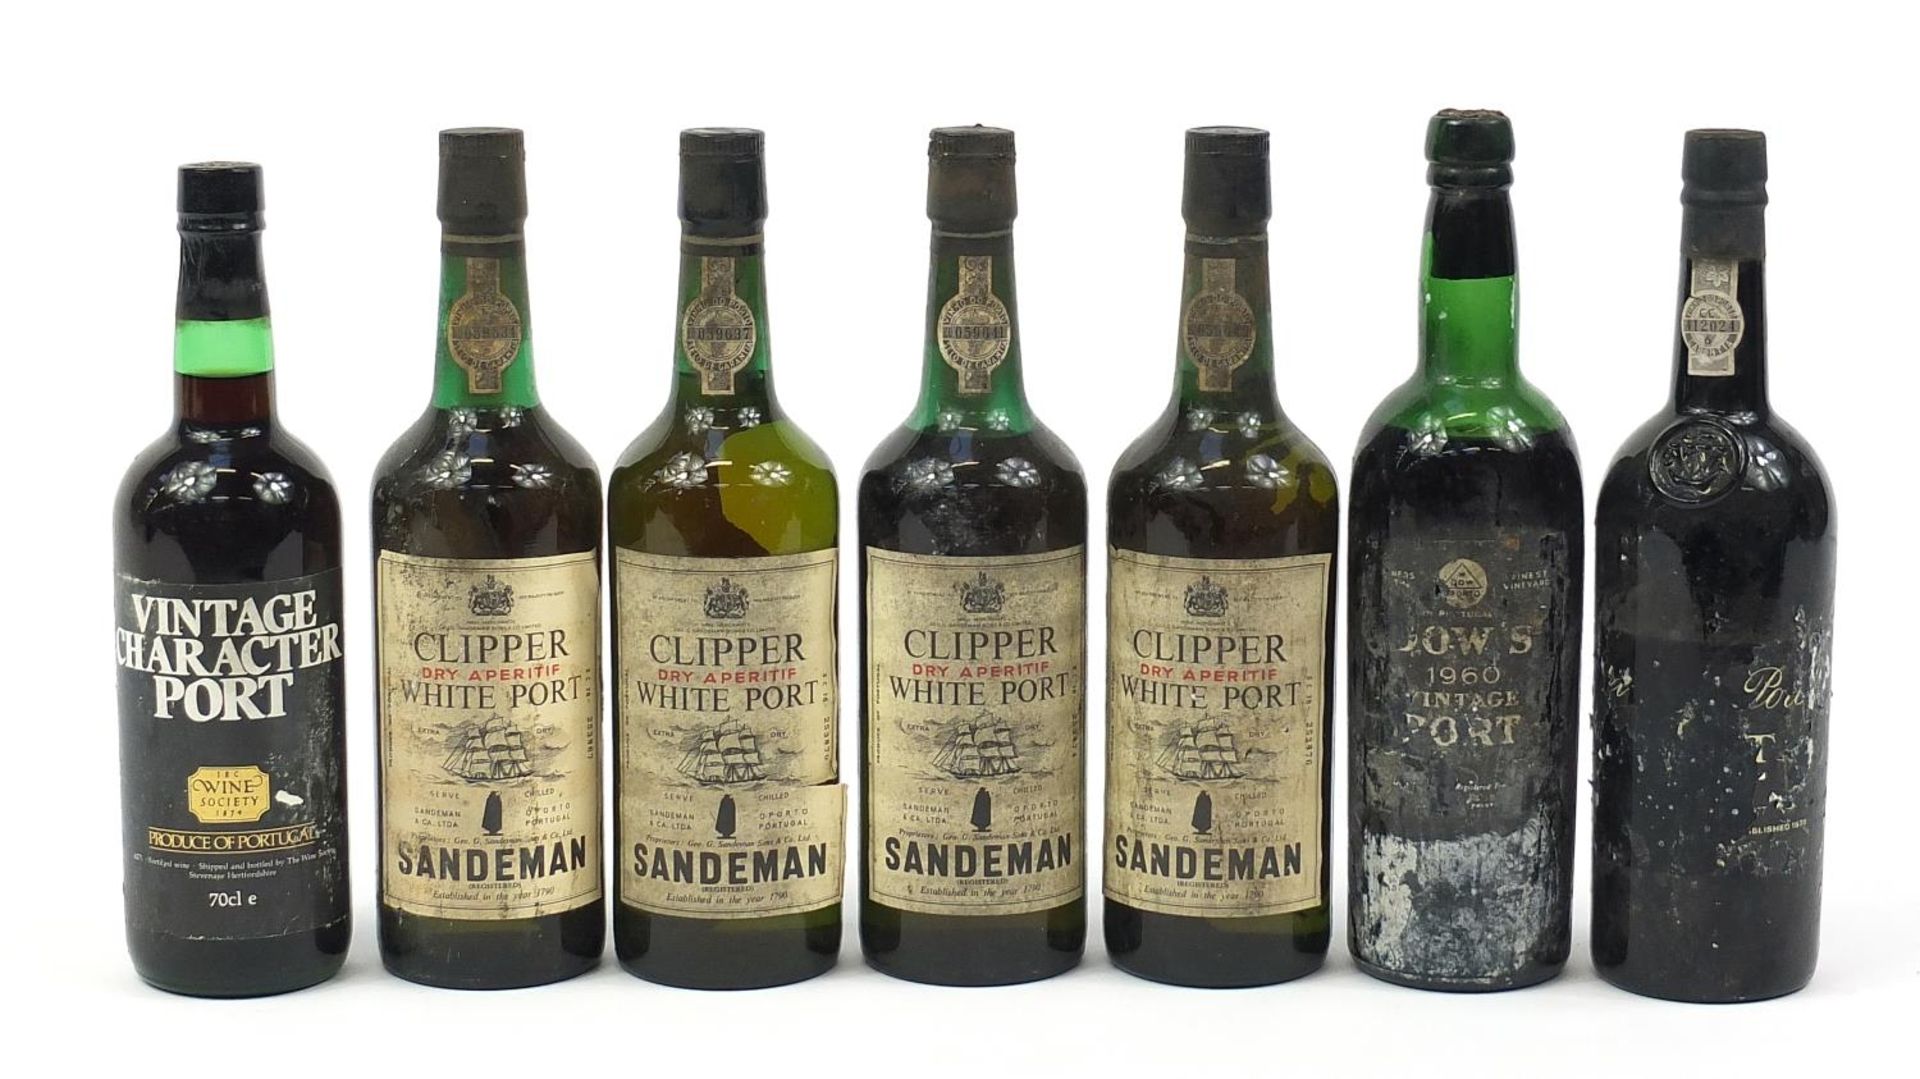 Seven bottles of vintage port to include 1960 Dow's and five bottles of Sandeman Clipper white port